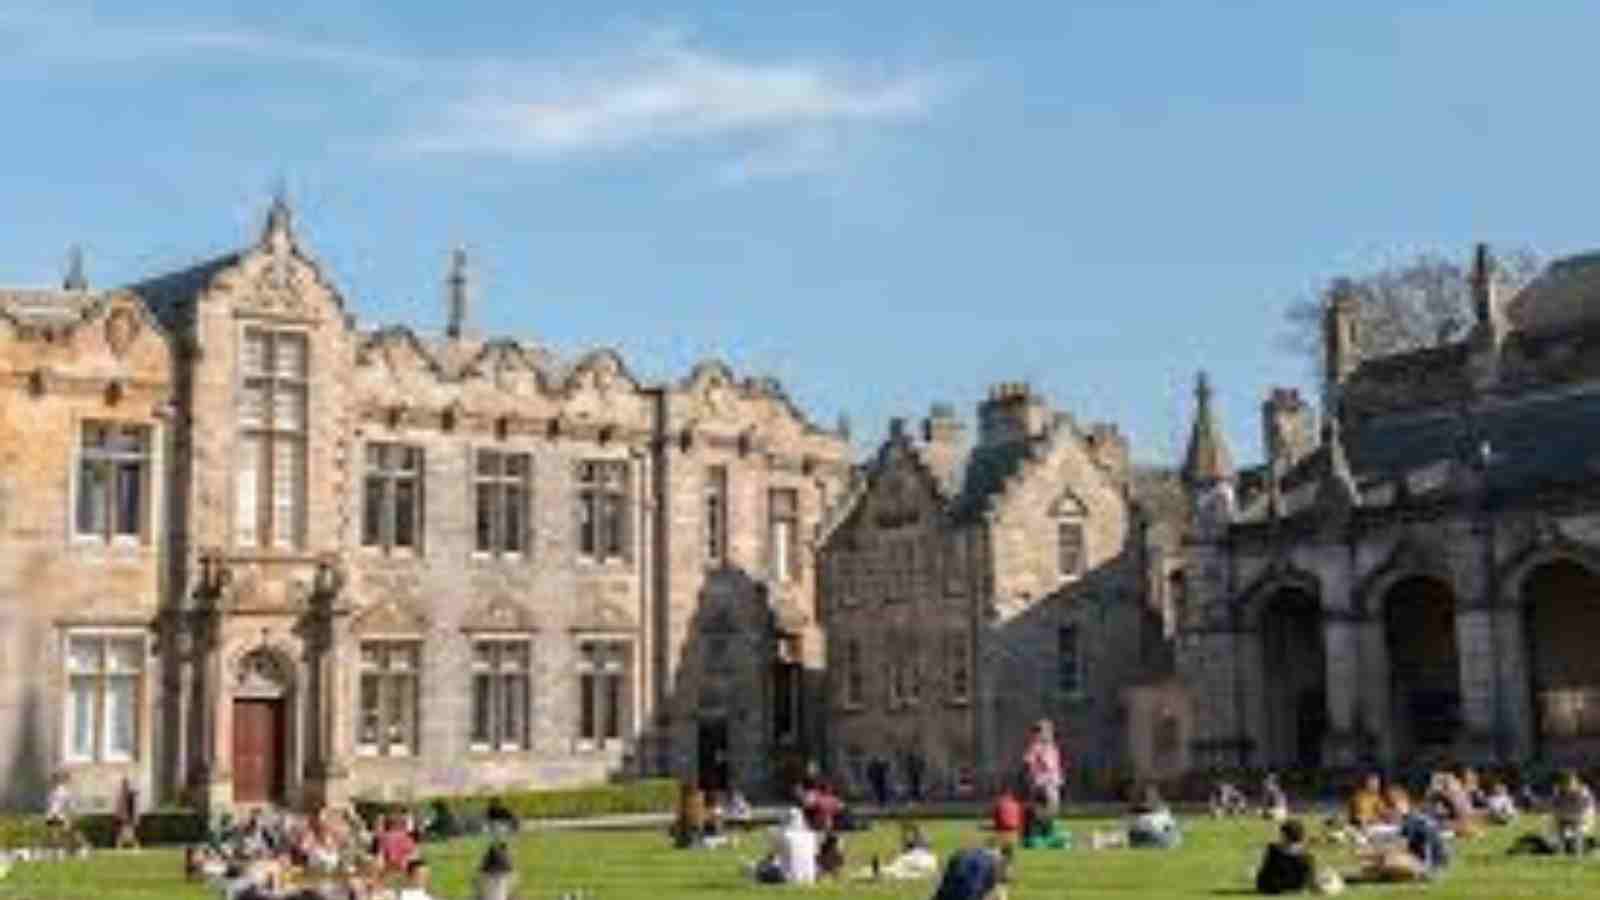 University of St Andrews students ranked most positive in UK